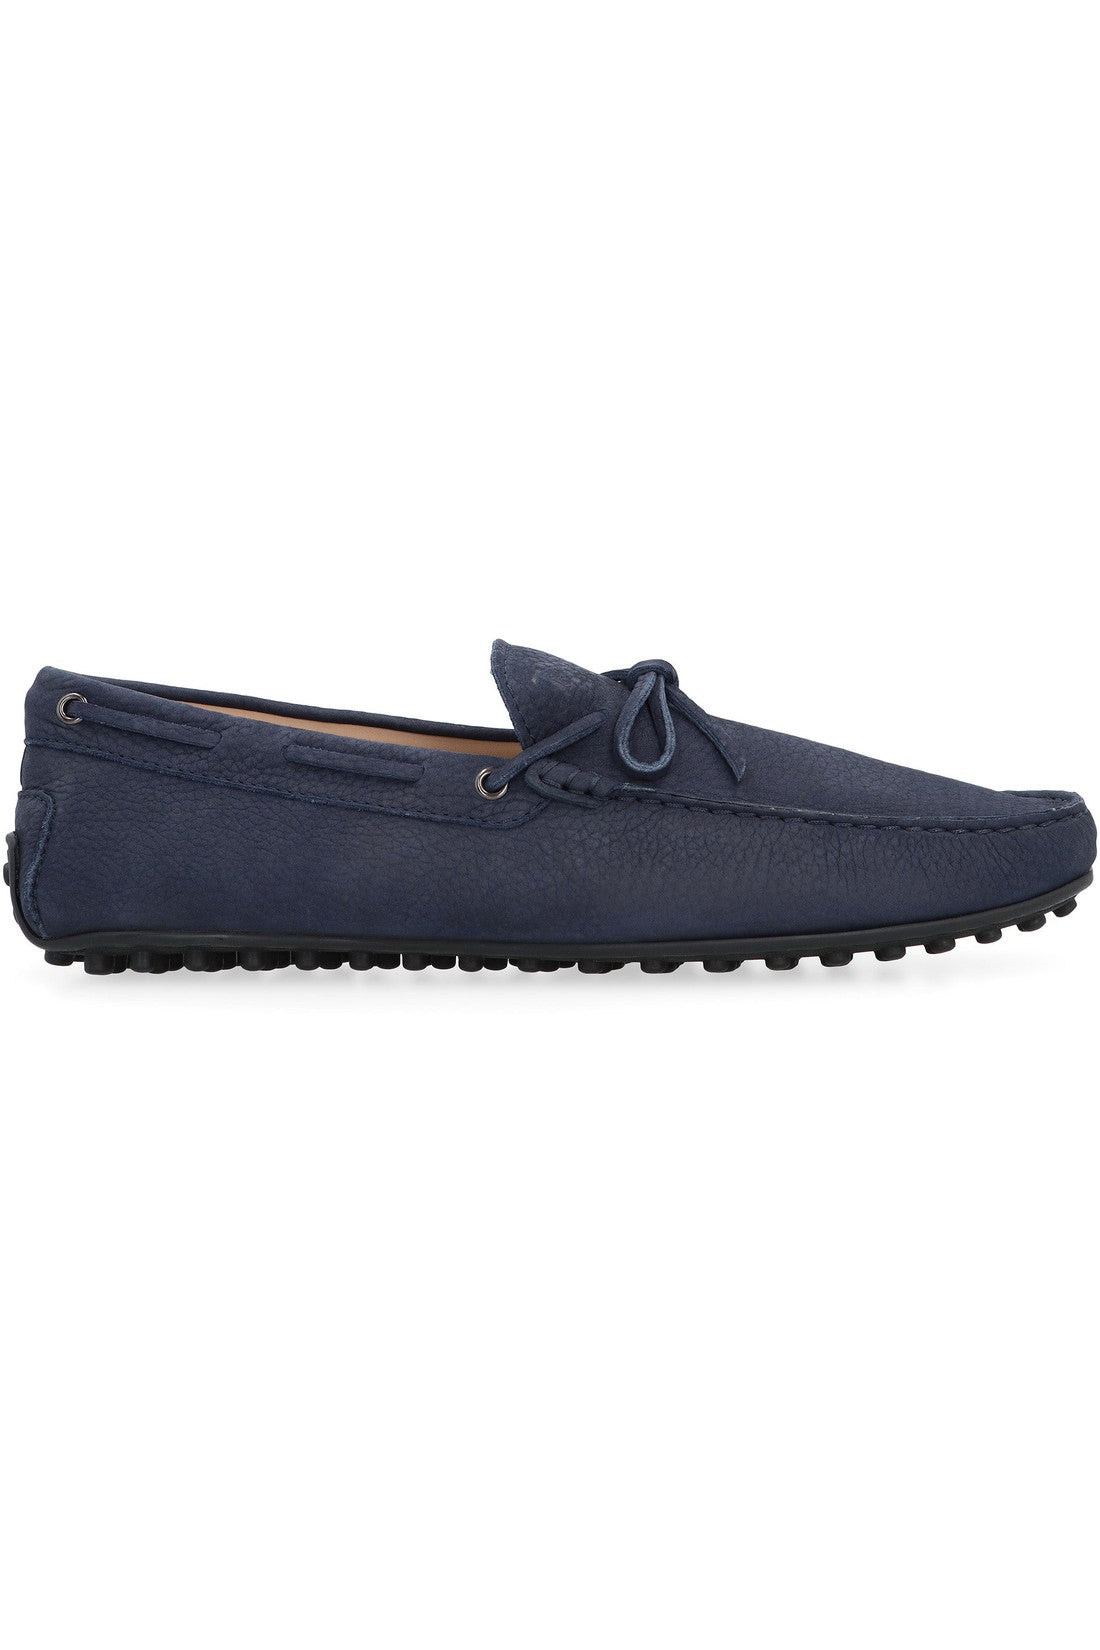 Tod's-OUTLET-SALE-Suede loafers-ARCHIVIST